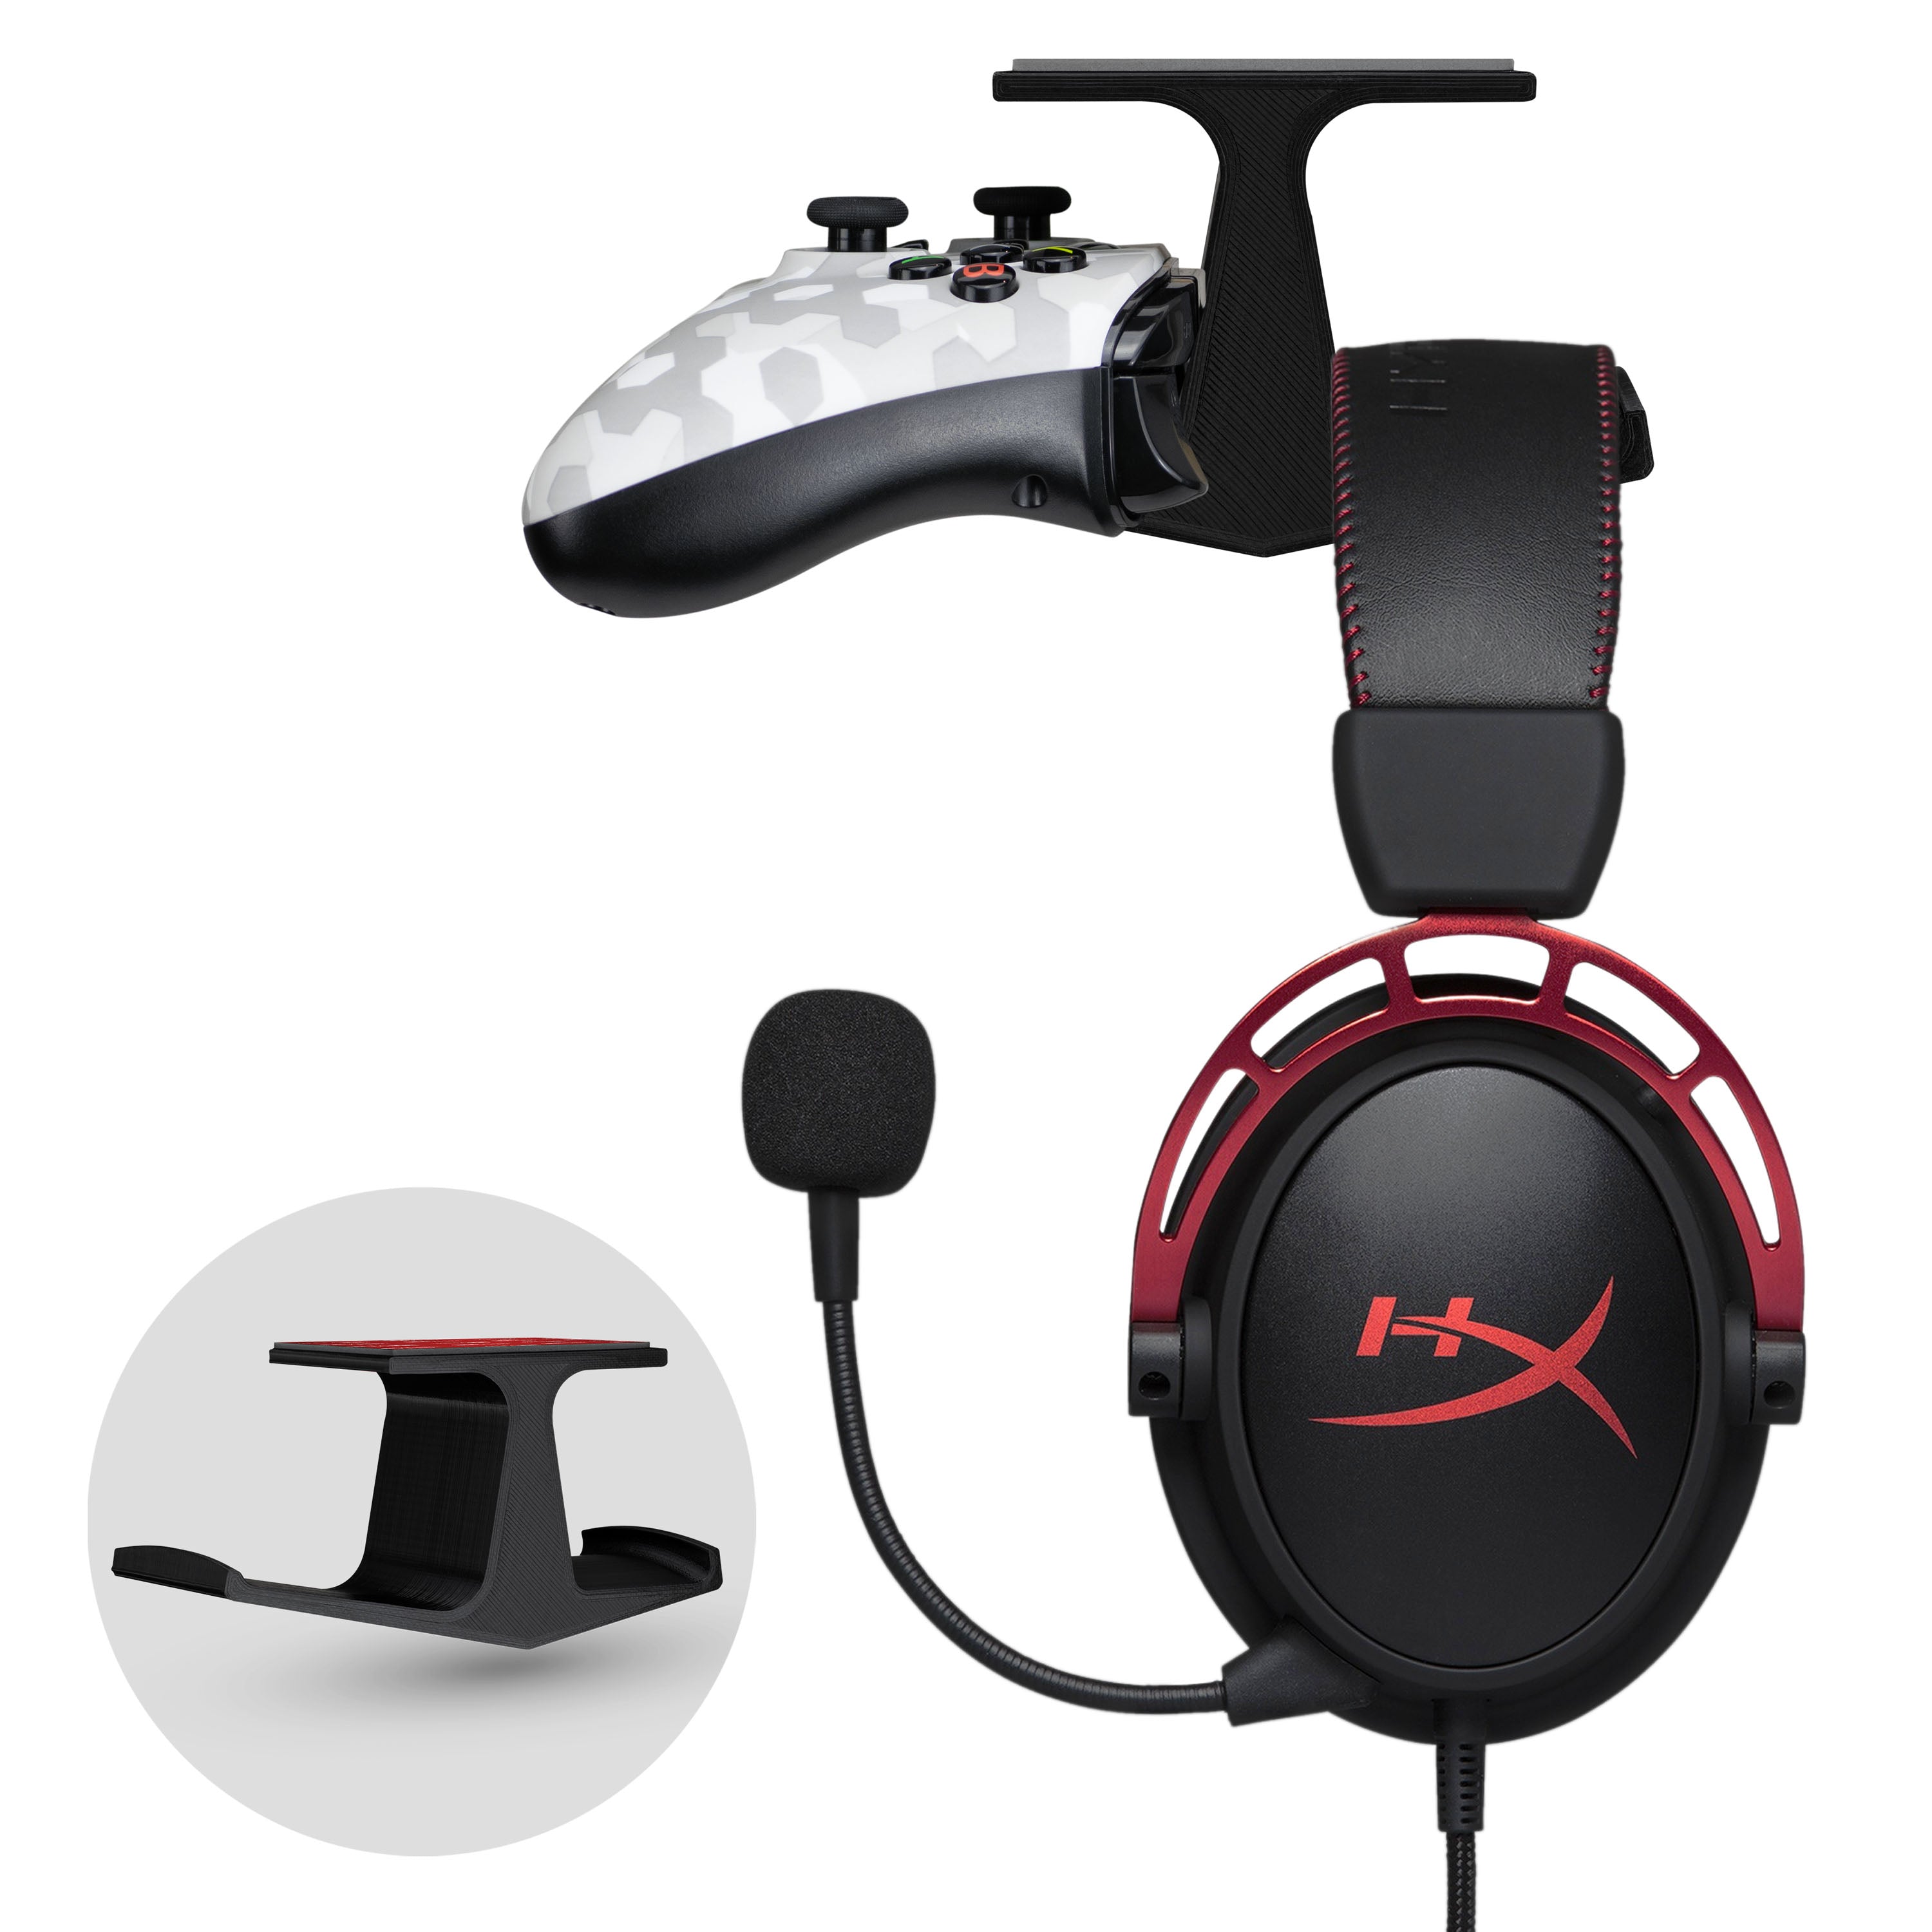 Casque gaming de gamer pour PS3 Playstation 3 Sony - PlayStation 3